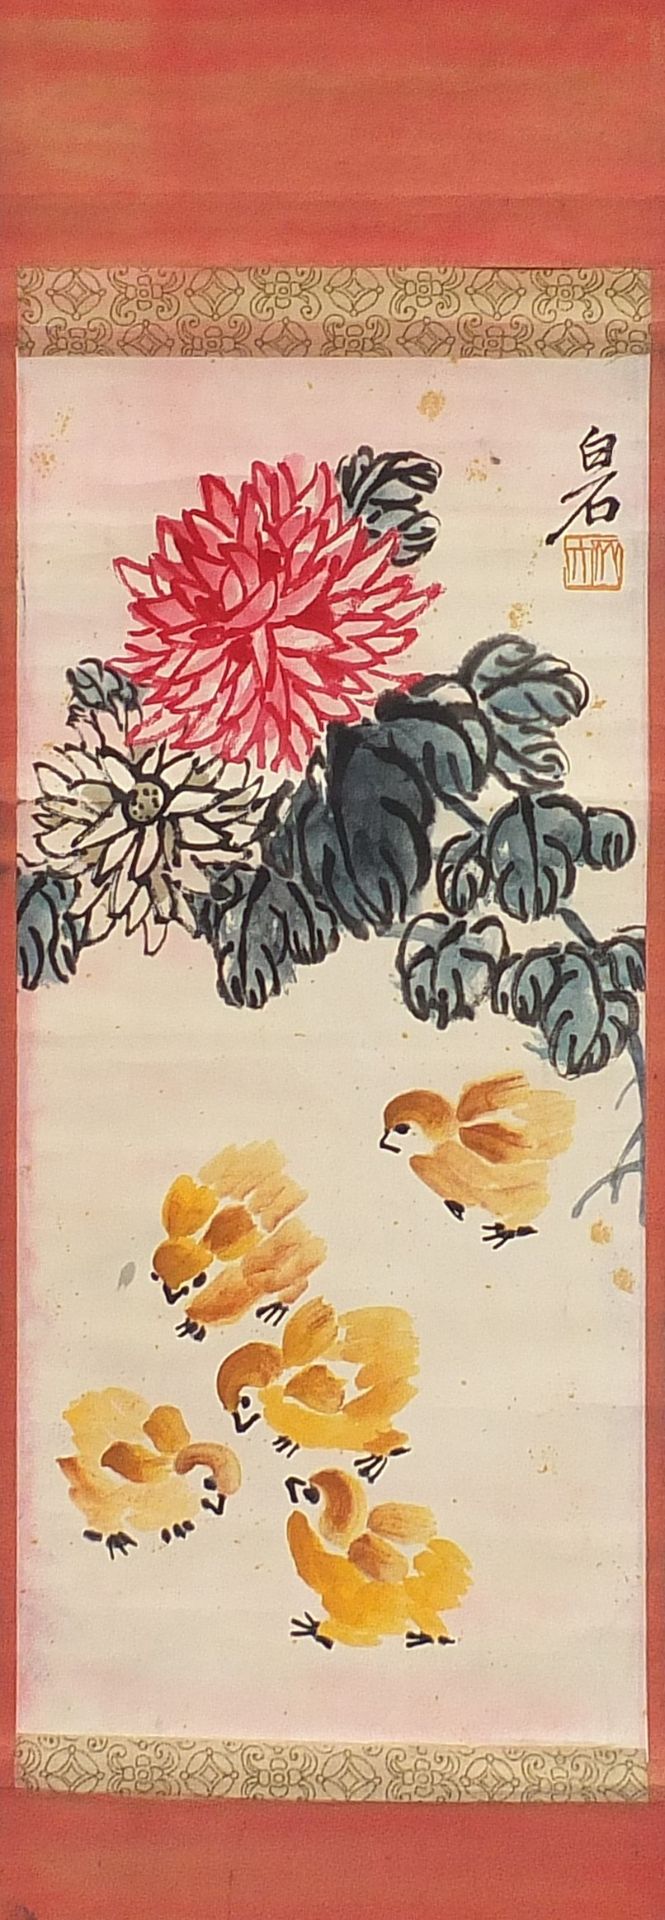 Attributed to Qi Baishi - Chrysanthemums and chicks, Chinese ink and watercolour walll hanging